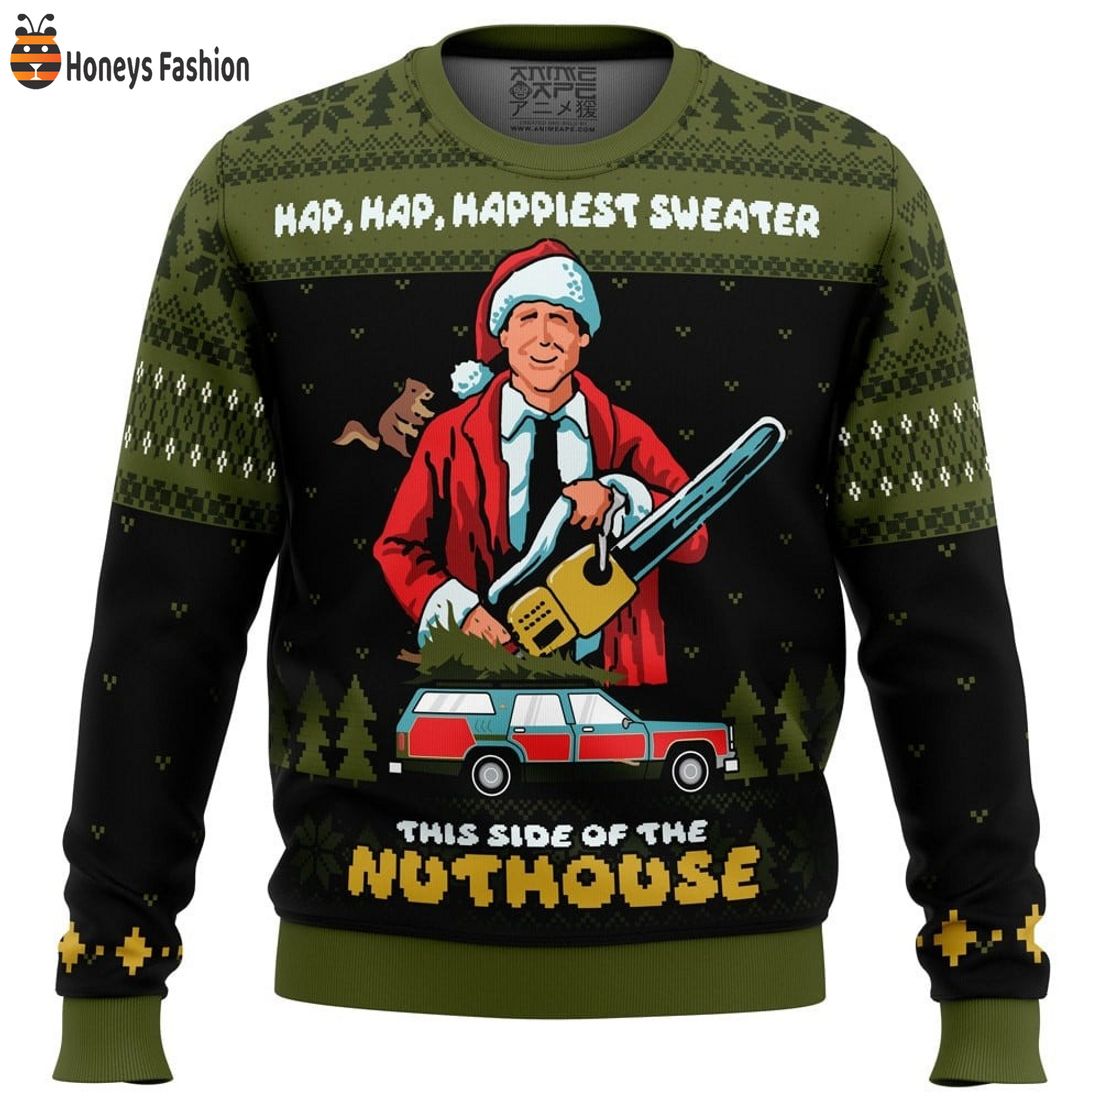 National Lampoon’s Christmas Vacation This Side Of The Nuthouse Ugly Sweater